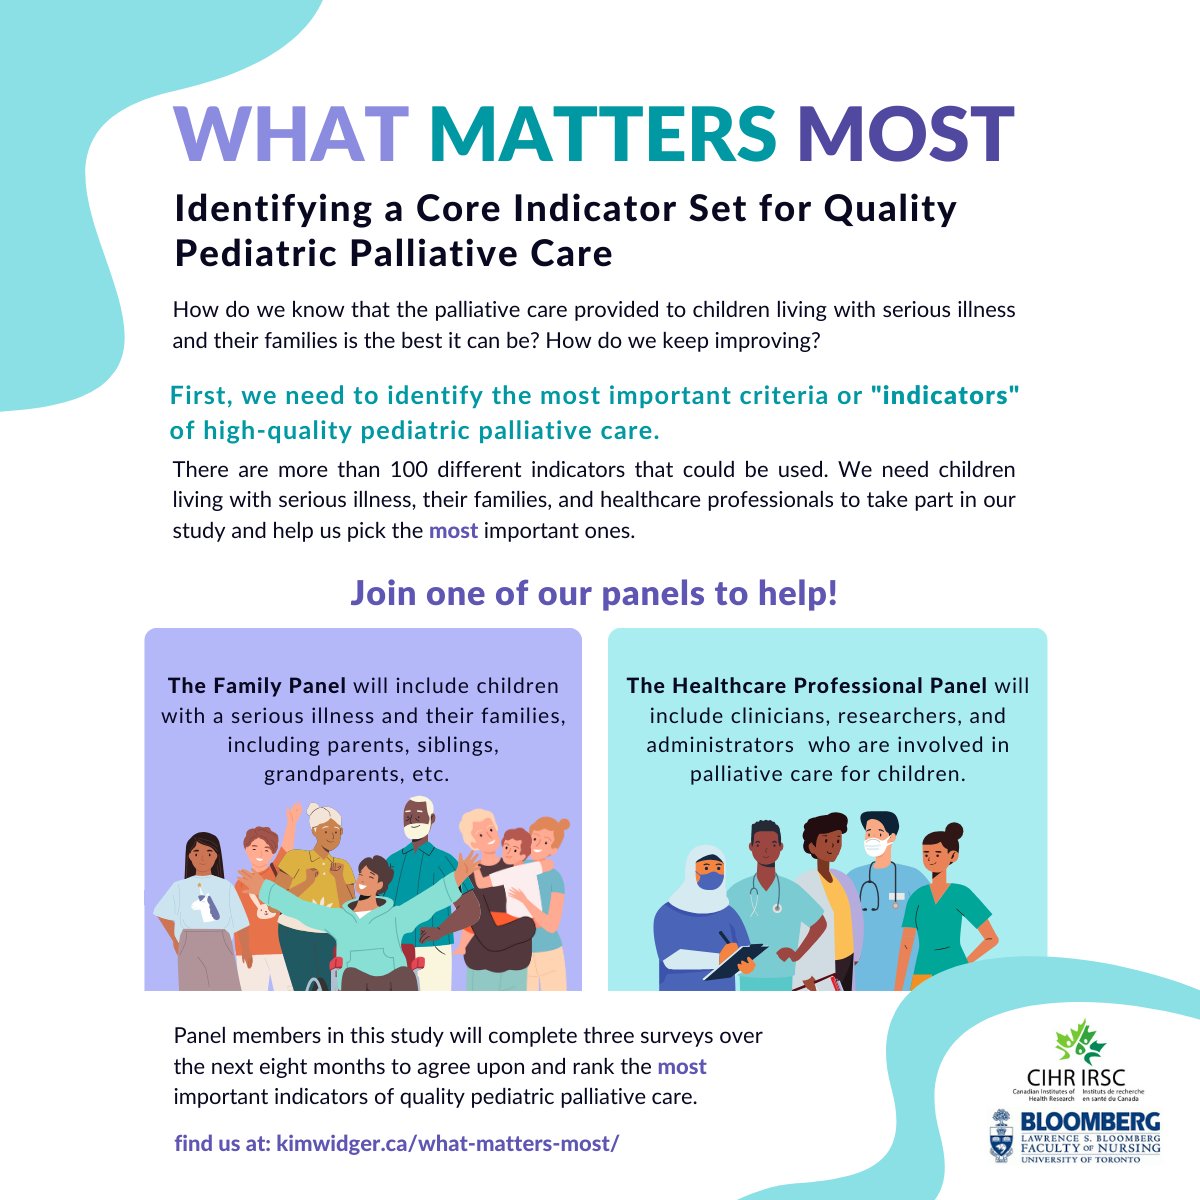 📢 Study Alert! Are you a family member of a child with a serious illness, or a health care professional involved in palliative care for children? Help us identify the most important criteria of high-quality #PediatricPalliativeCare
Learn more ➡️ kimwidger.ca/what-matters-m…